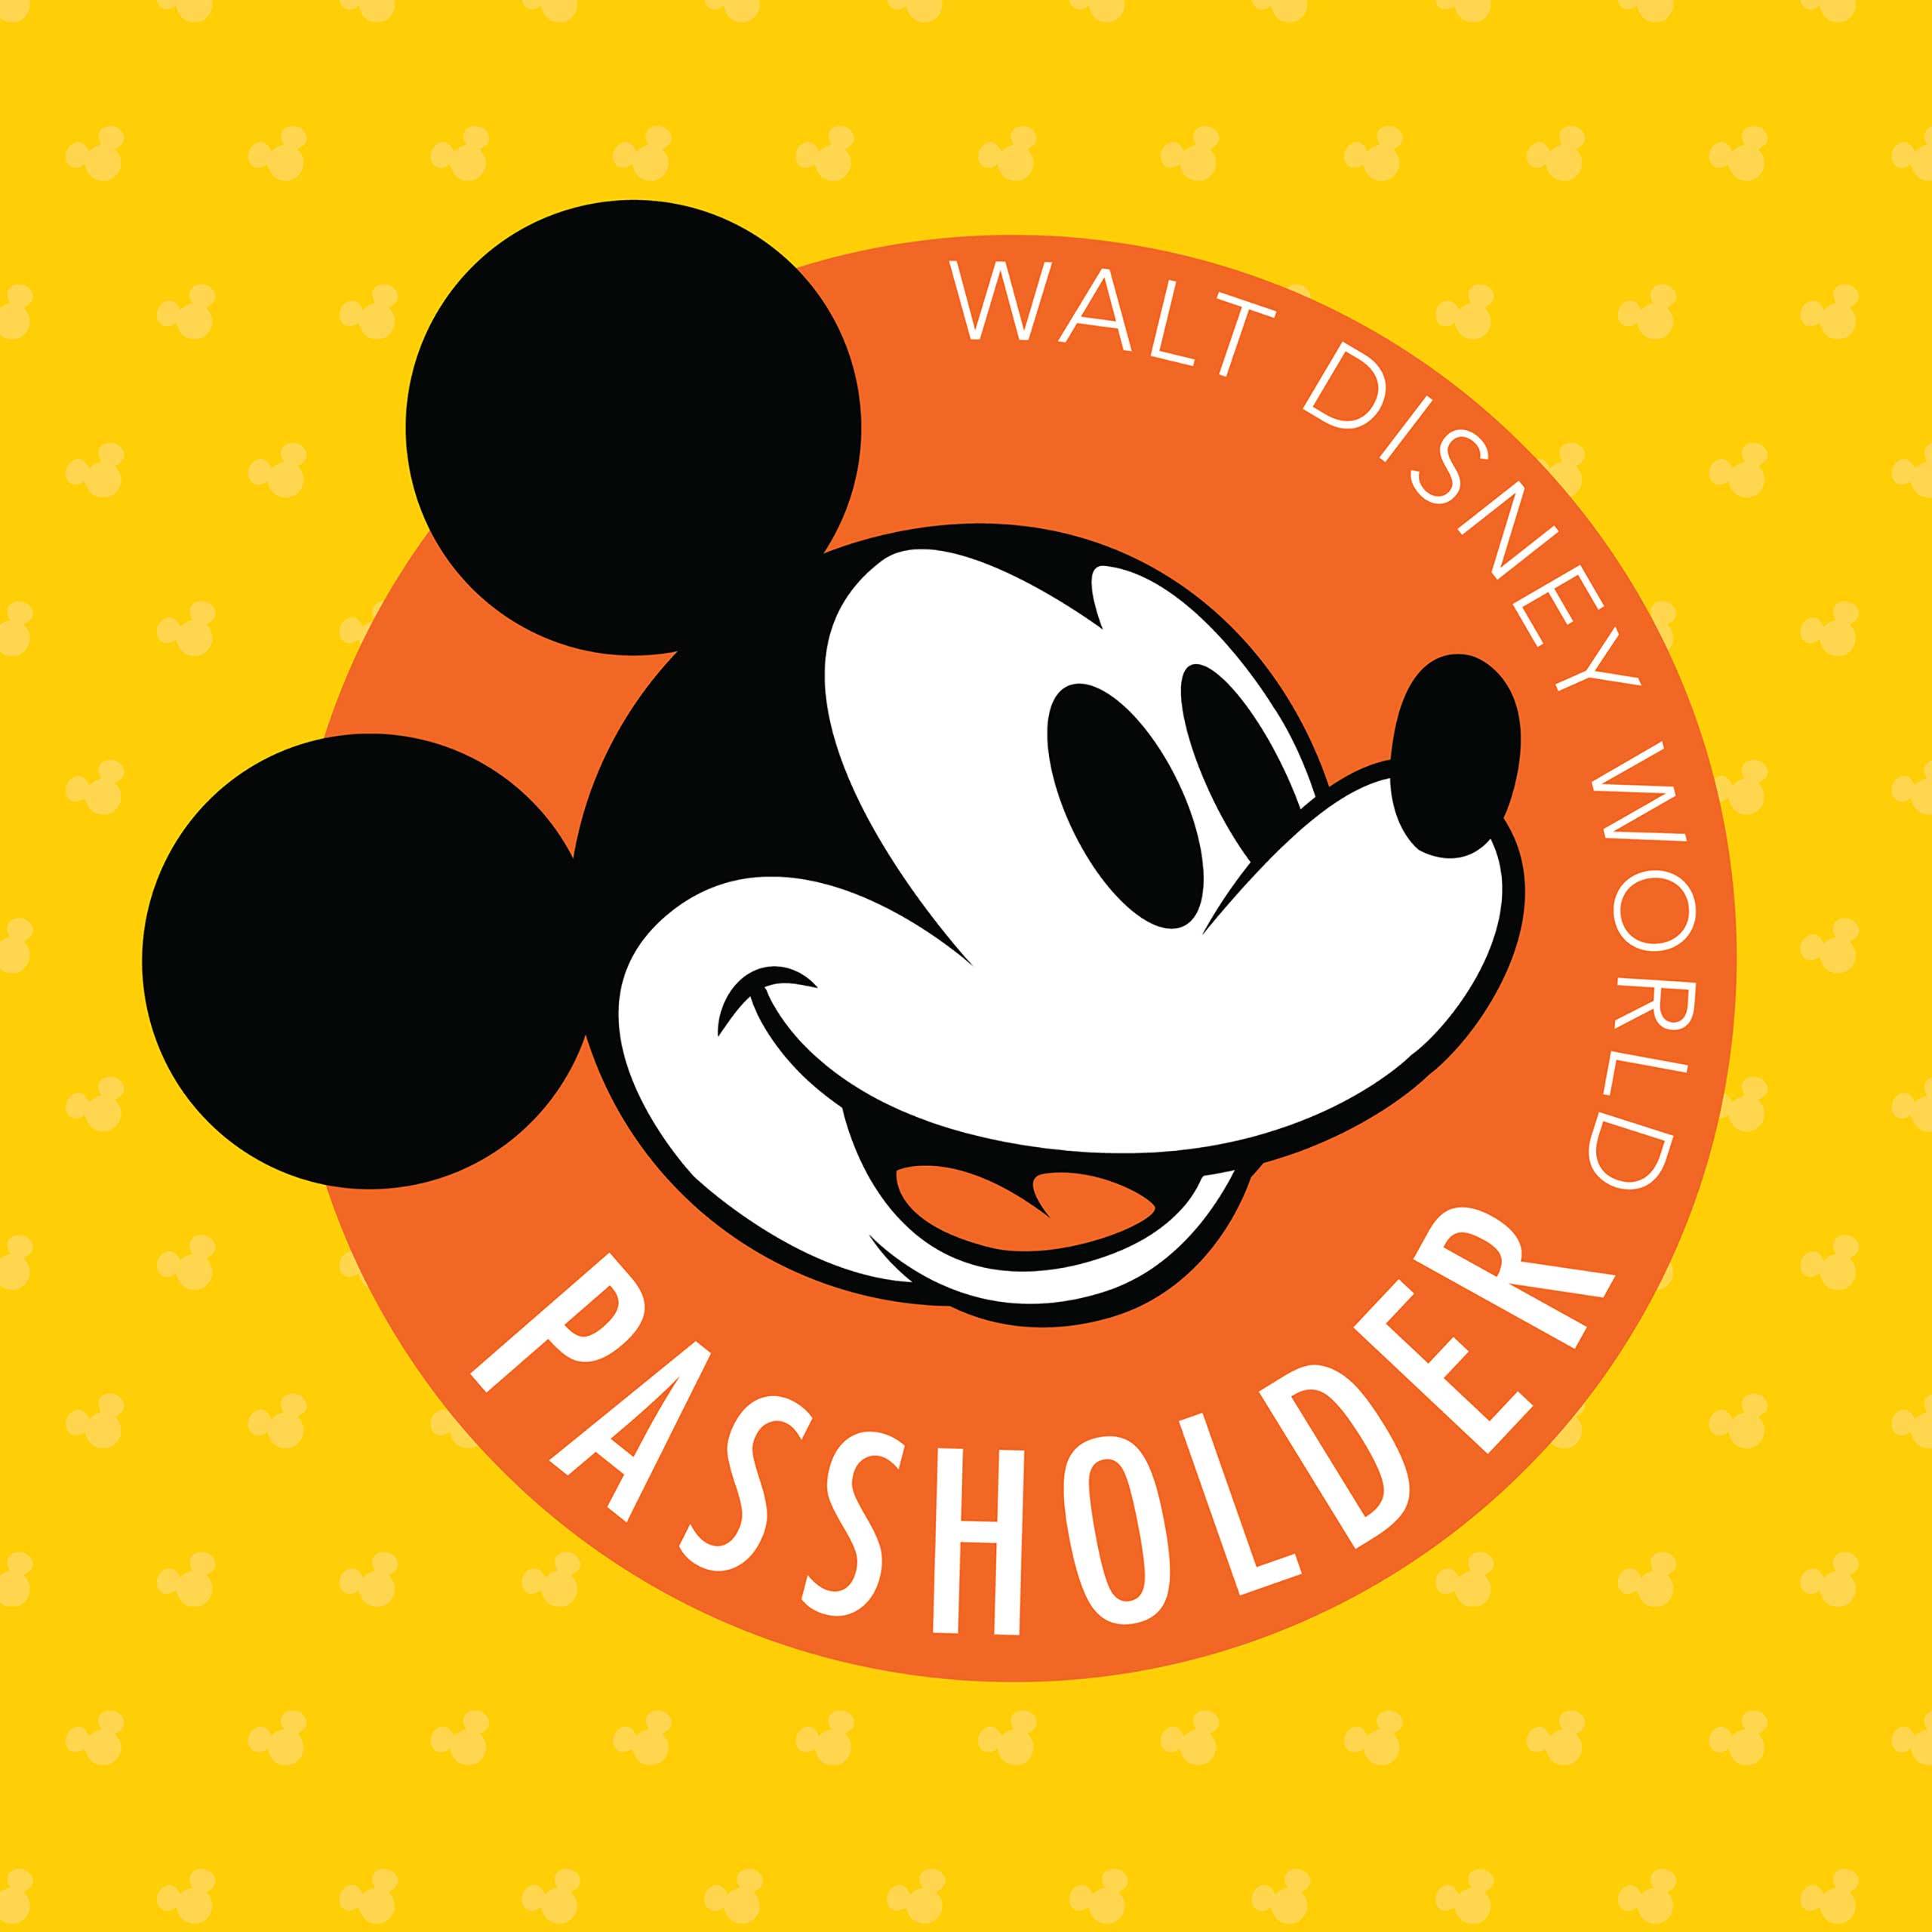 Some existing Walt Disney World Annual Passholders will soon be able to make more theme park reservations